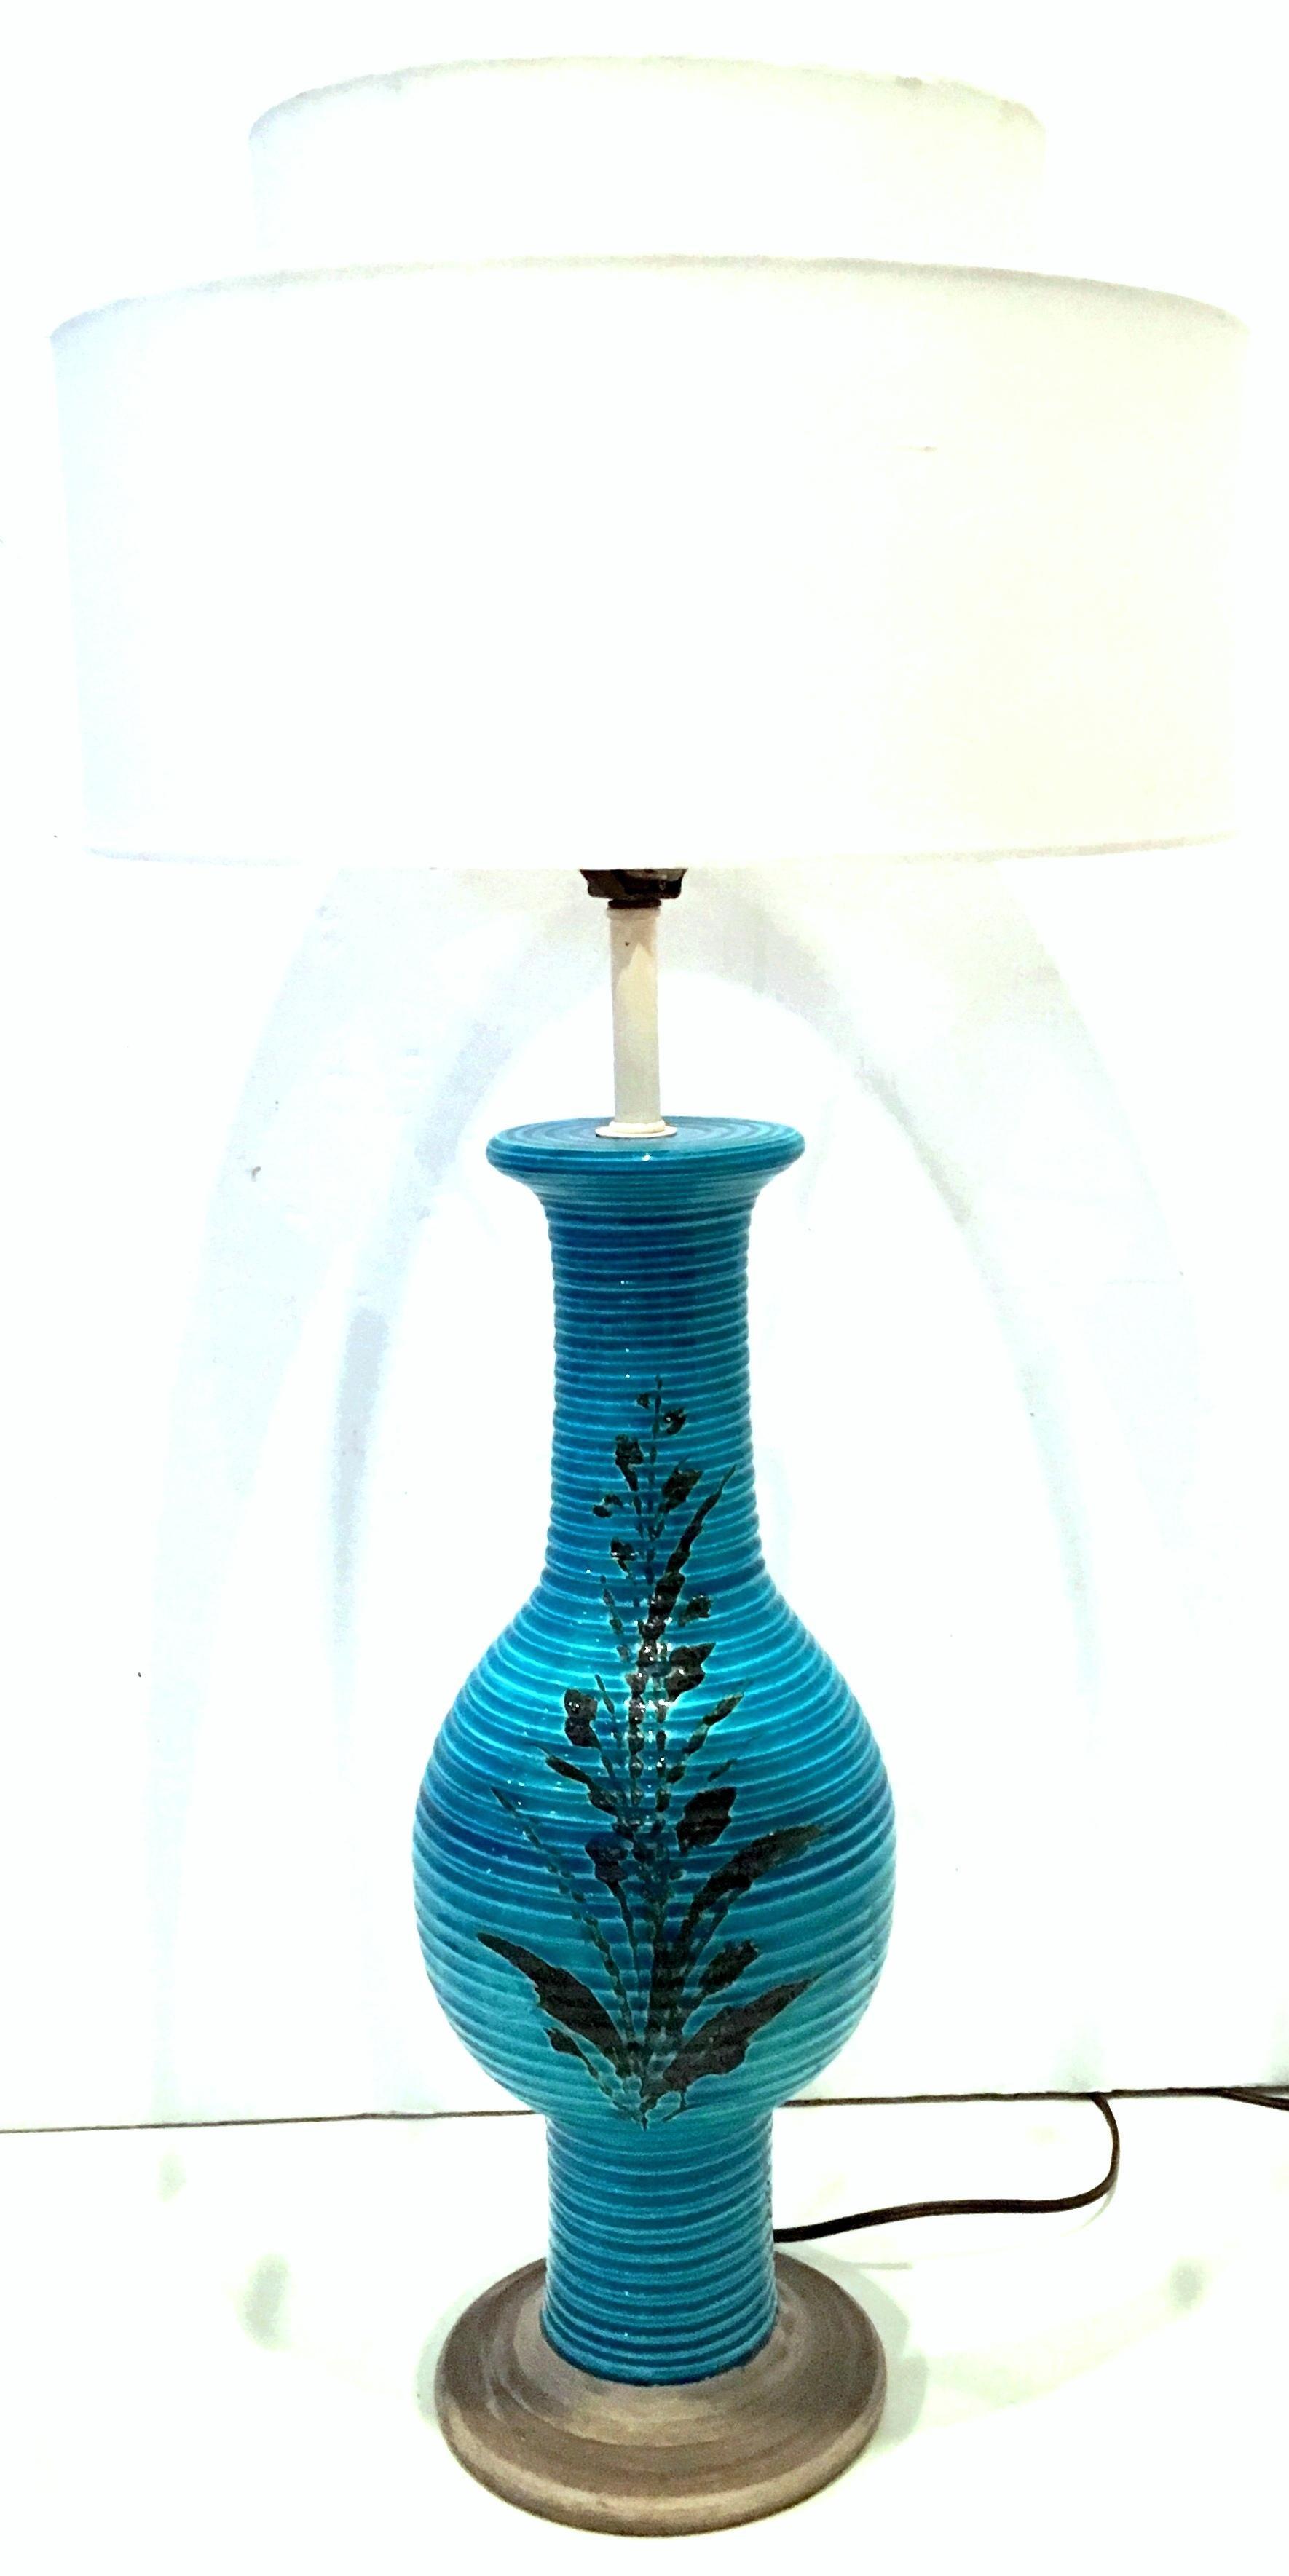 1960s Bitossi for Raymor Coveted Italian handcrafted, two-tone cerulean blue and black hand painted, double sided floral motif ceramic pottery lamp signed and numbered. The faux bois finished base is made of ceramic. The neck and socket, harp and